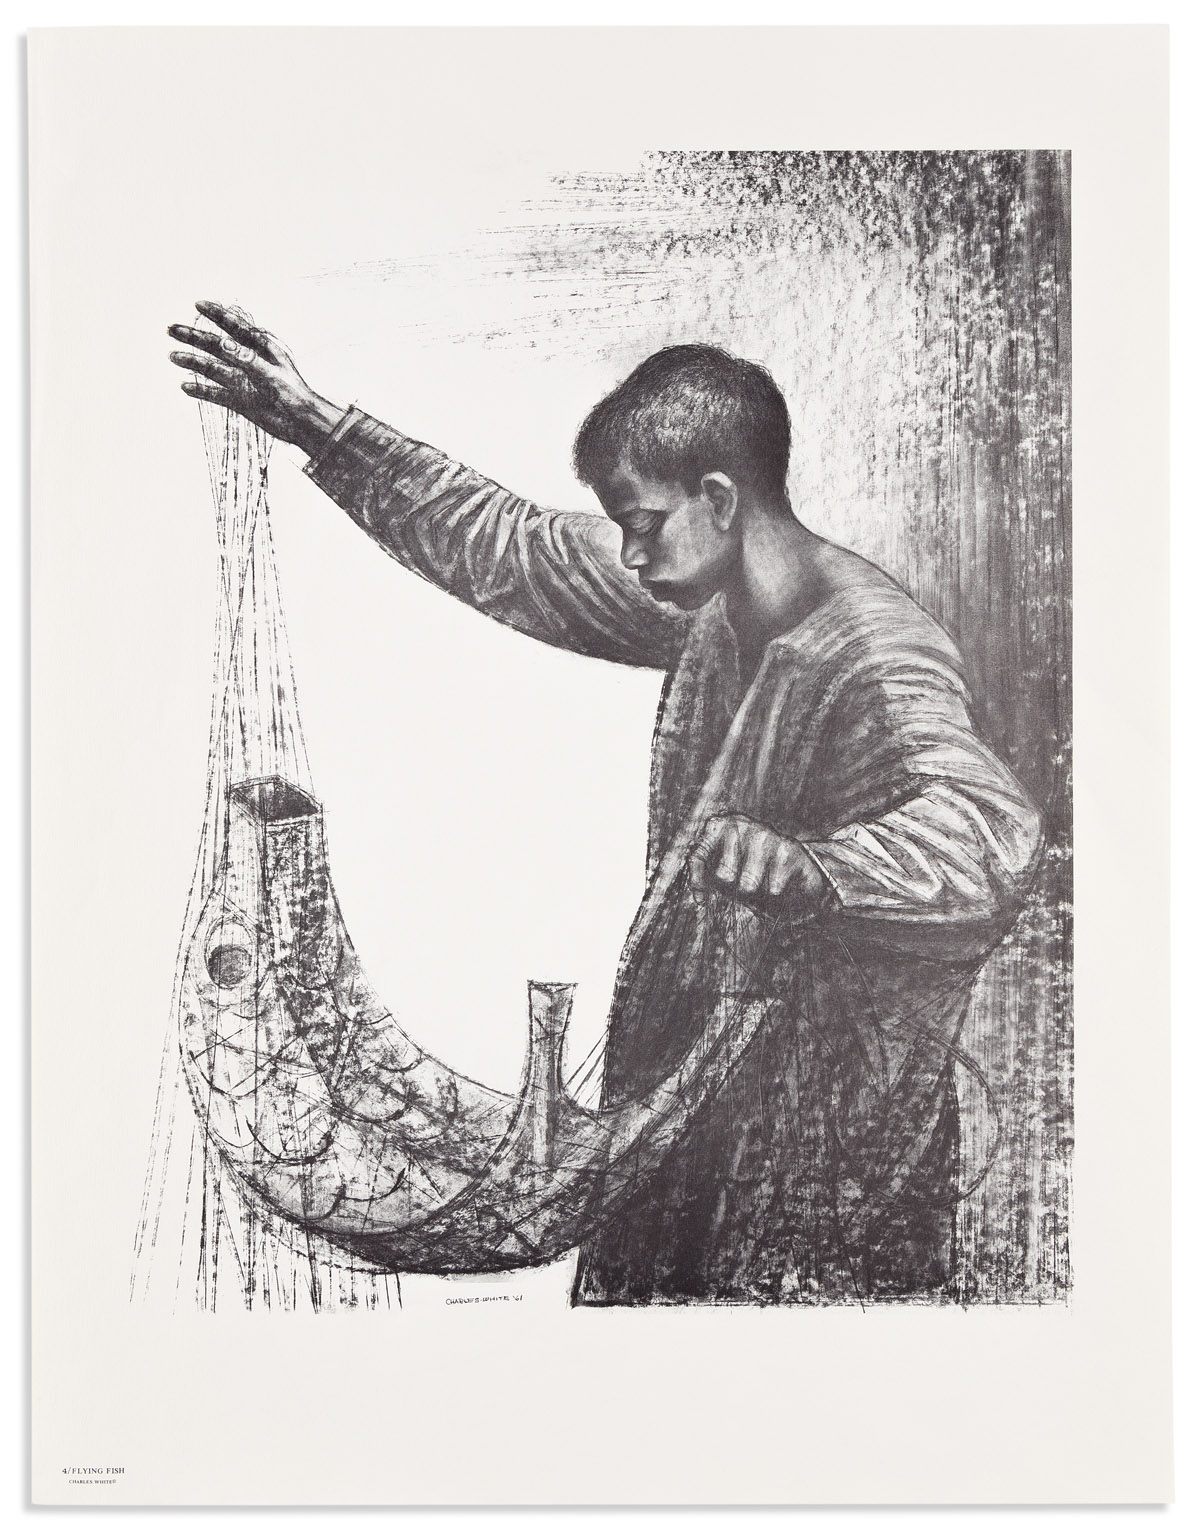 (ART.) Charles White. His 10 portfolio, signed and inscribed.